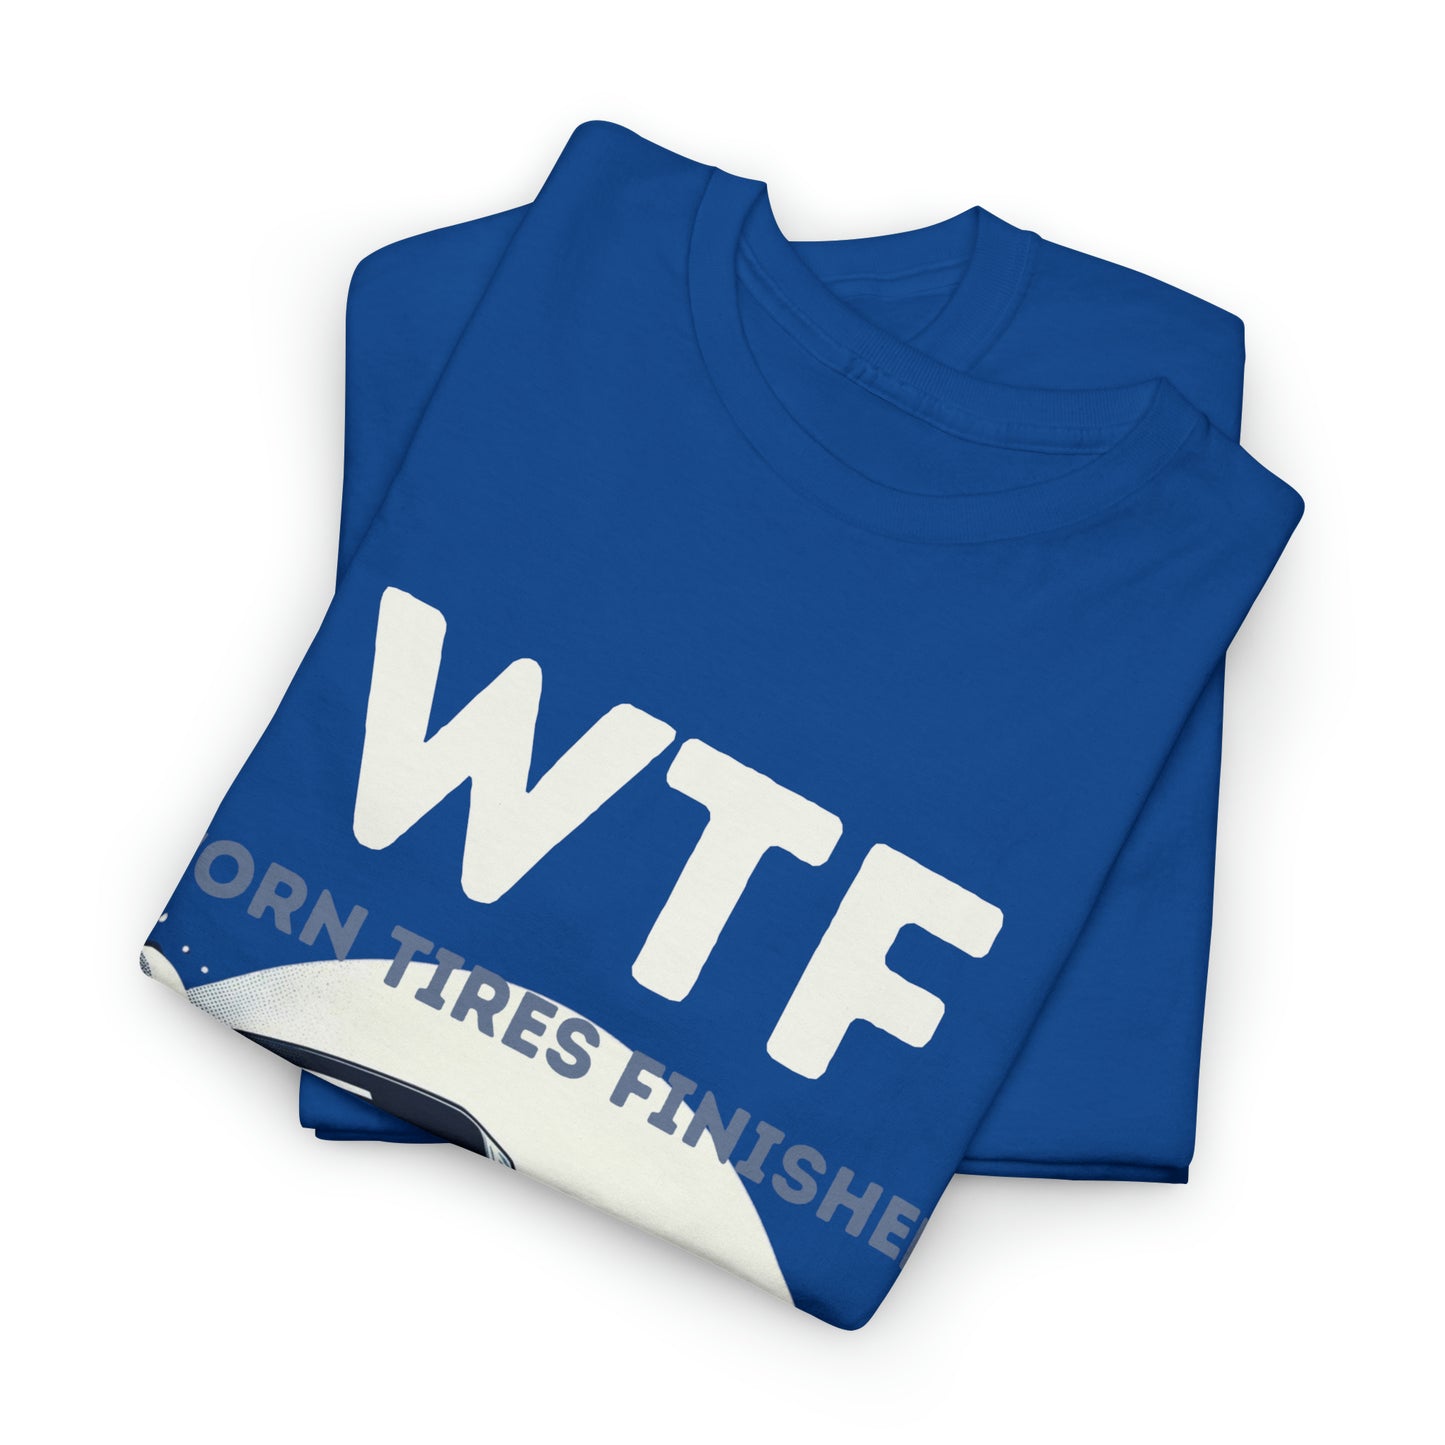 WTF - Worn Tires Finished Burnout Unisex Heavy Cotton Tee